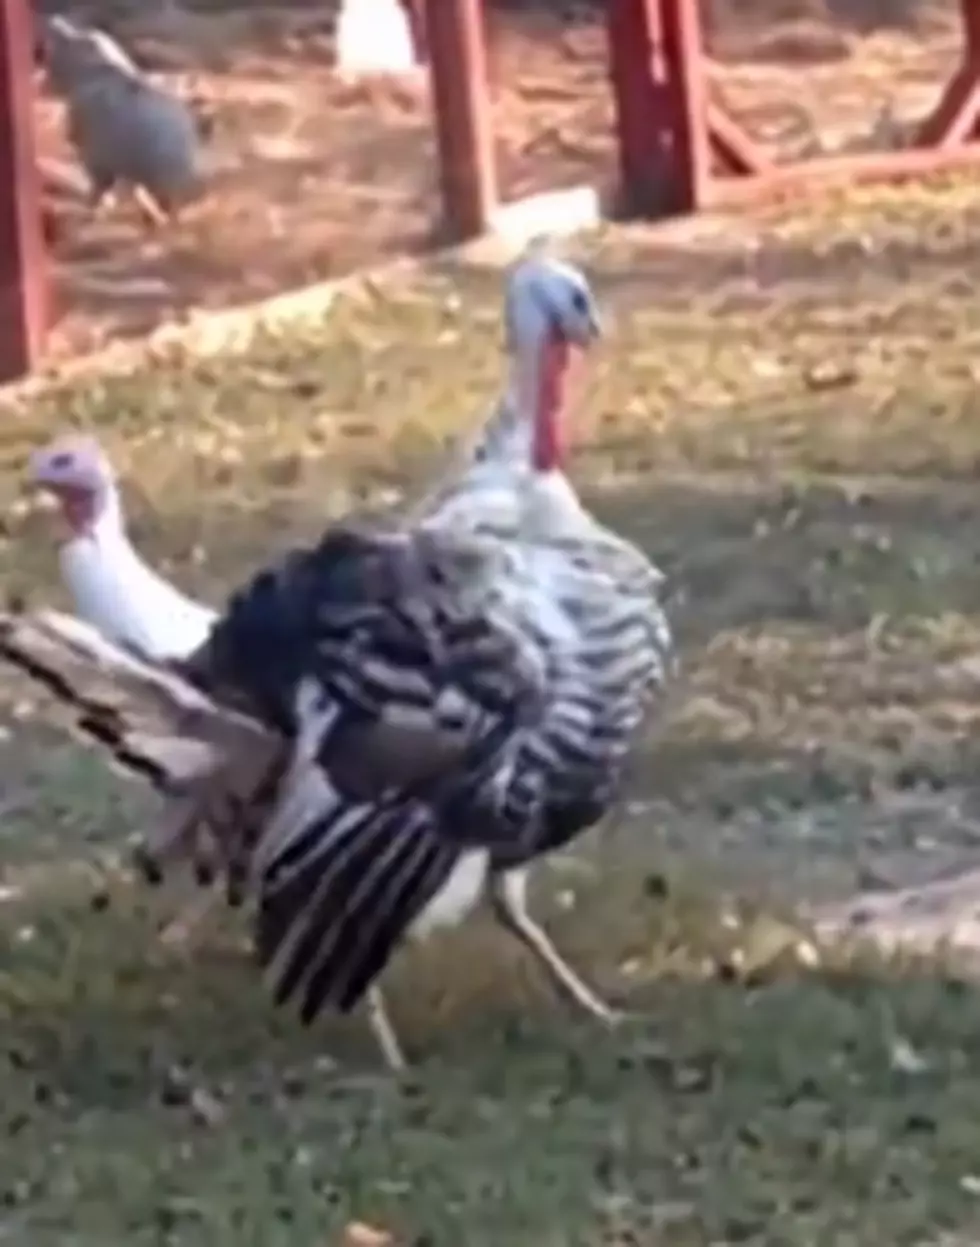 A Turkey Spins In Circles, Gets Dizzy And Falls Over [Video]